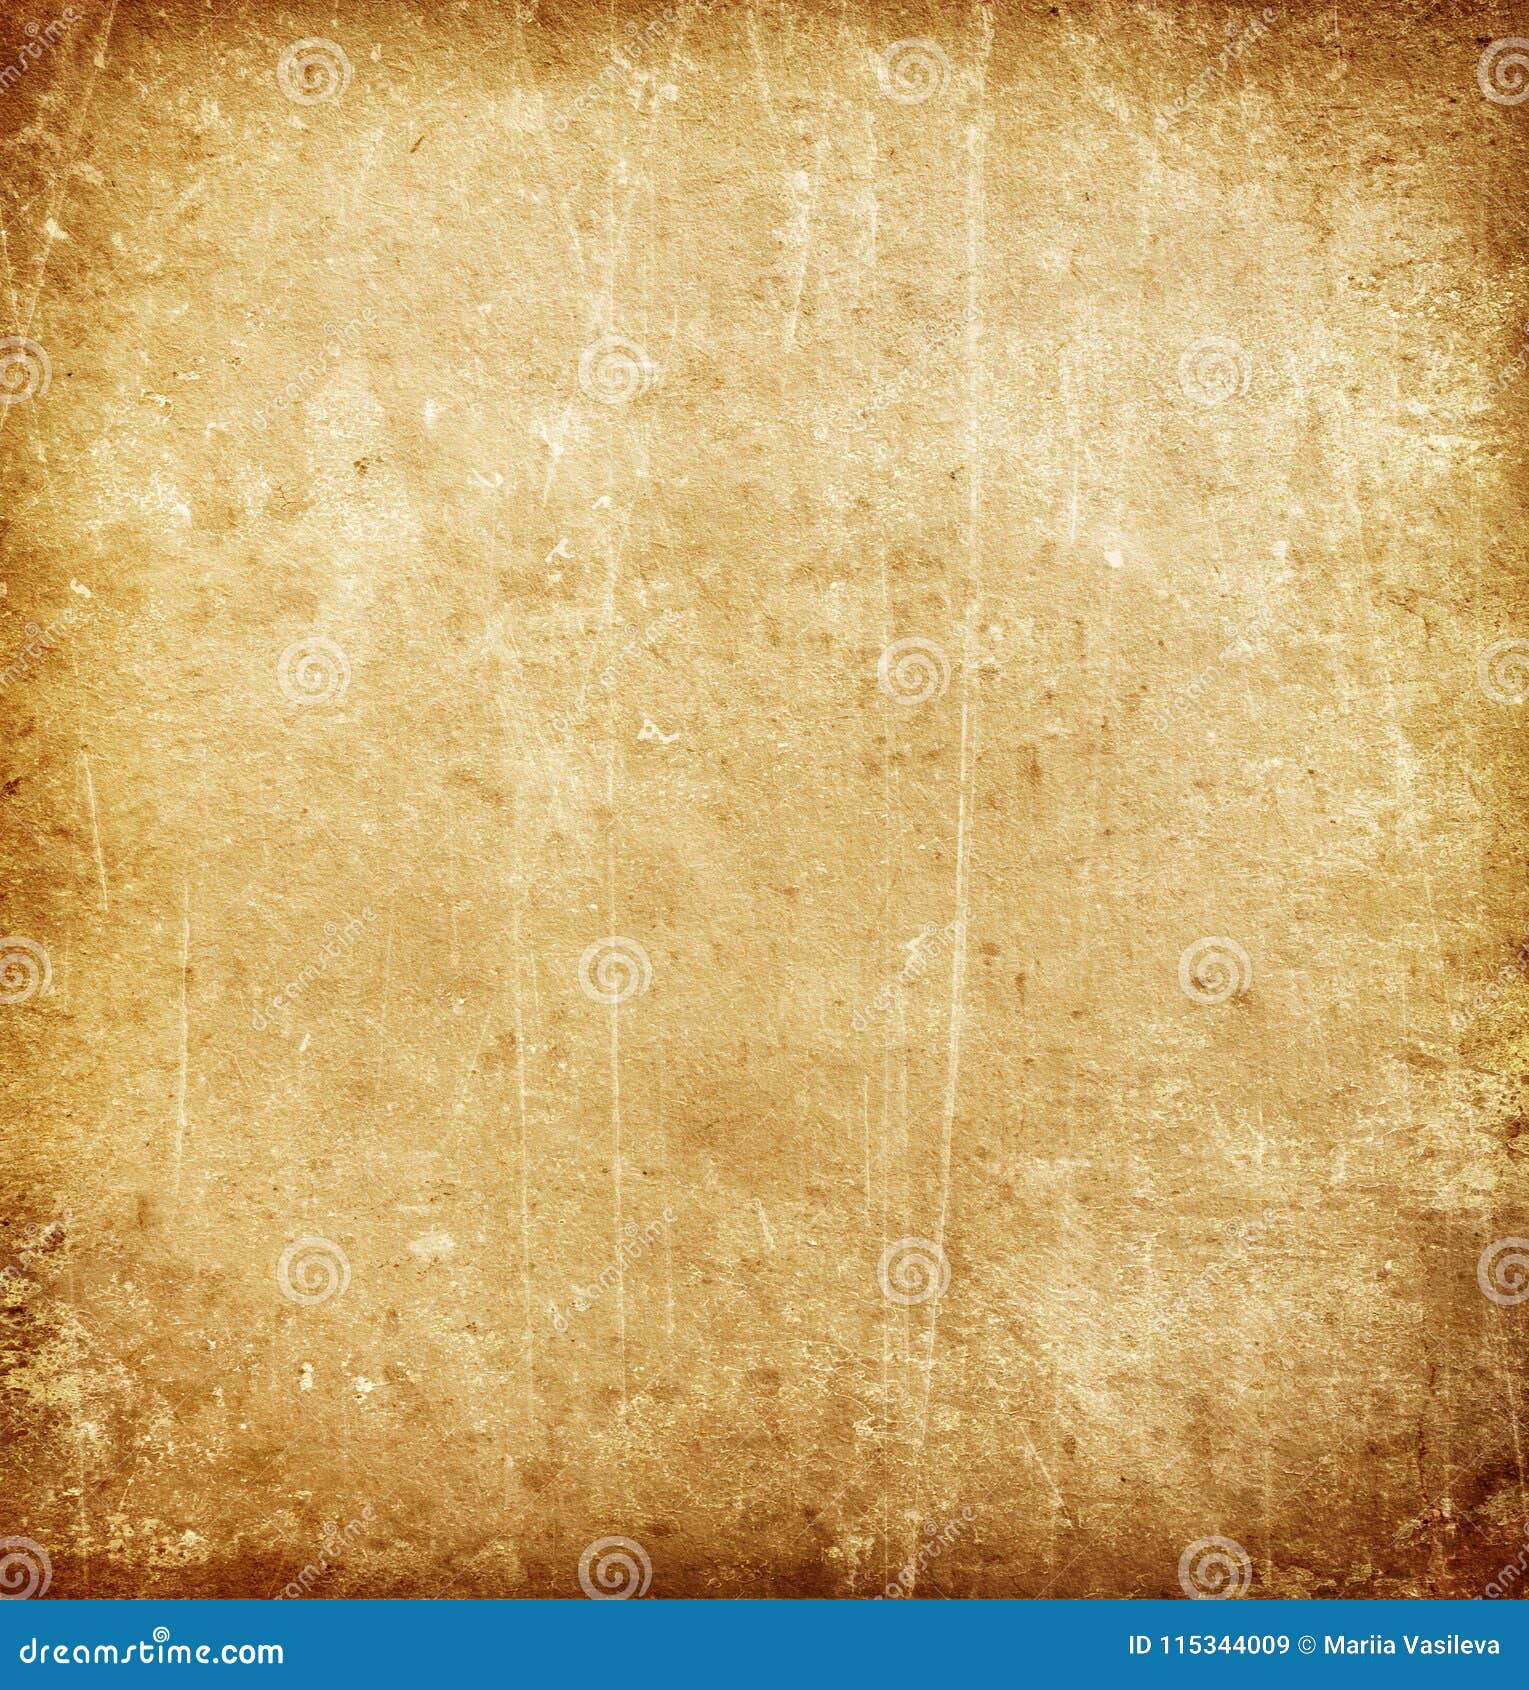 Old Grunge Canvas Paper Texture Stock Photo, Picture and Royalty